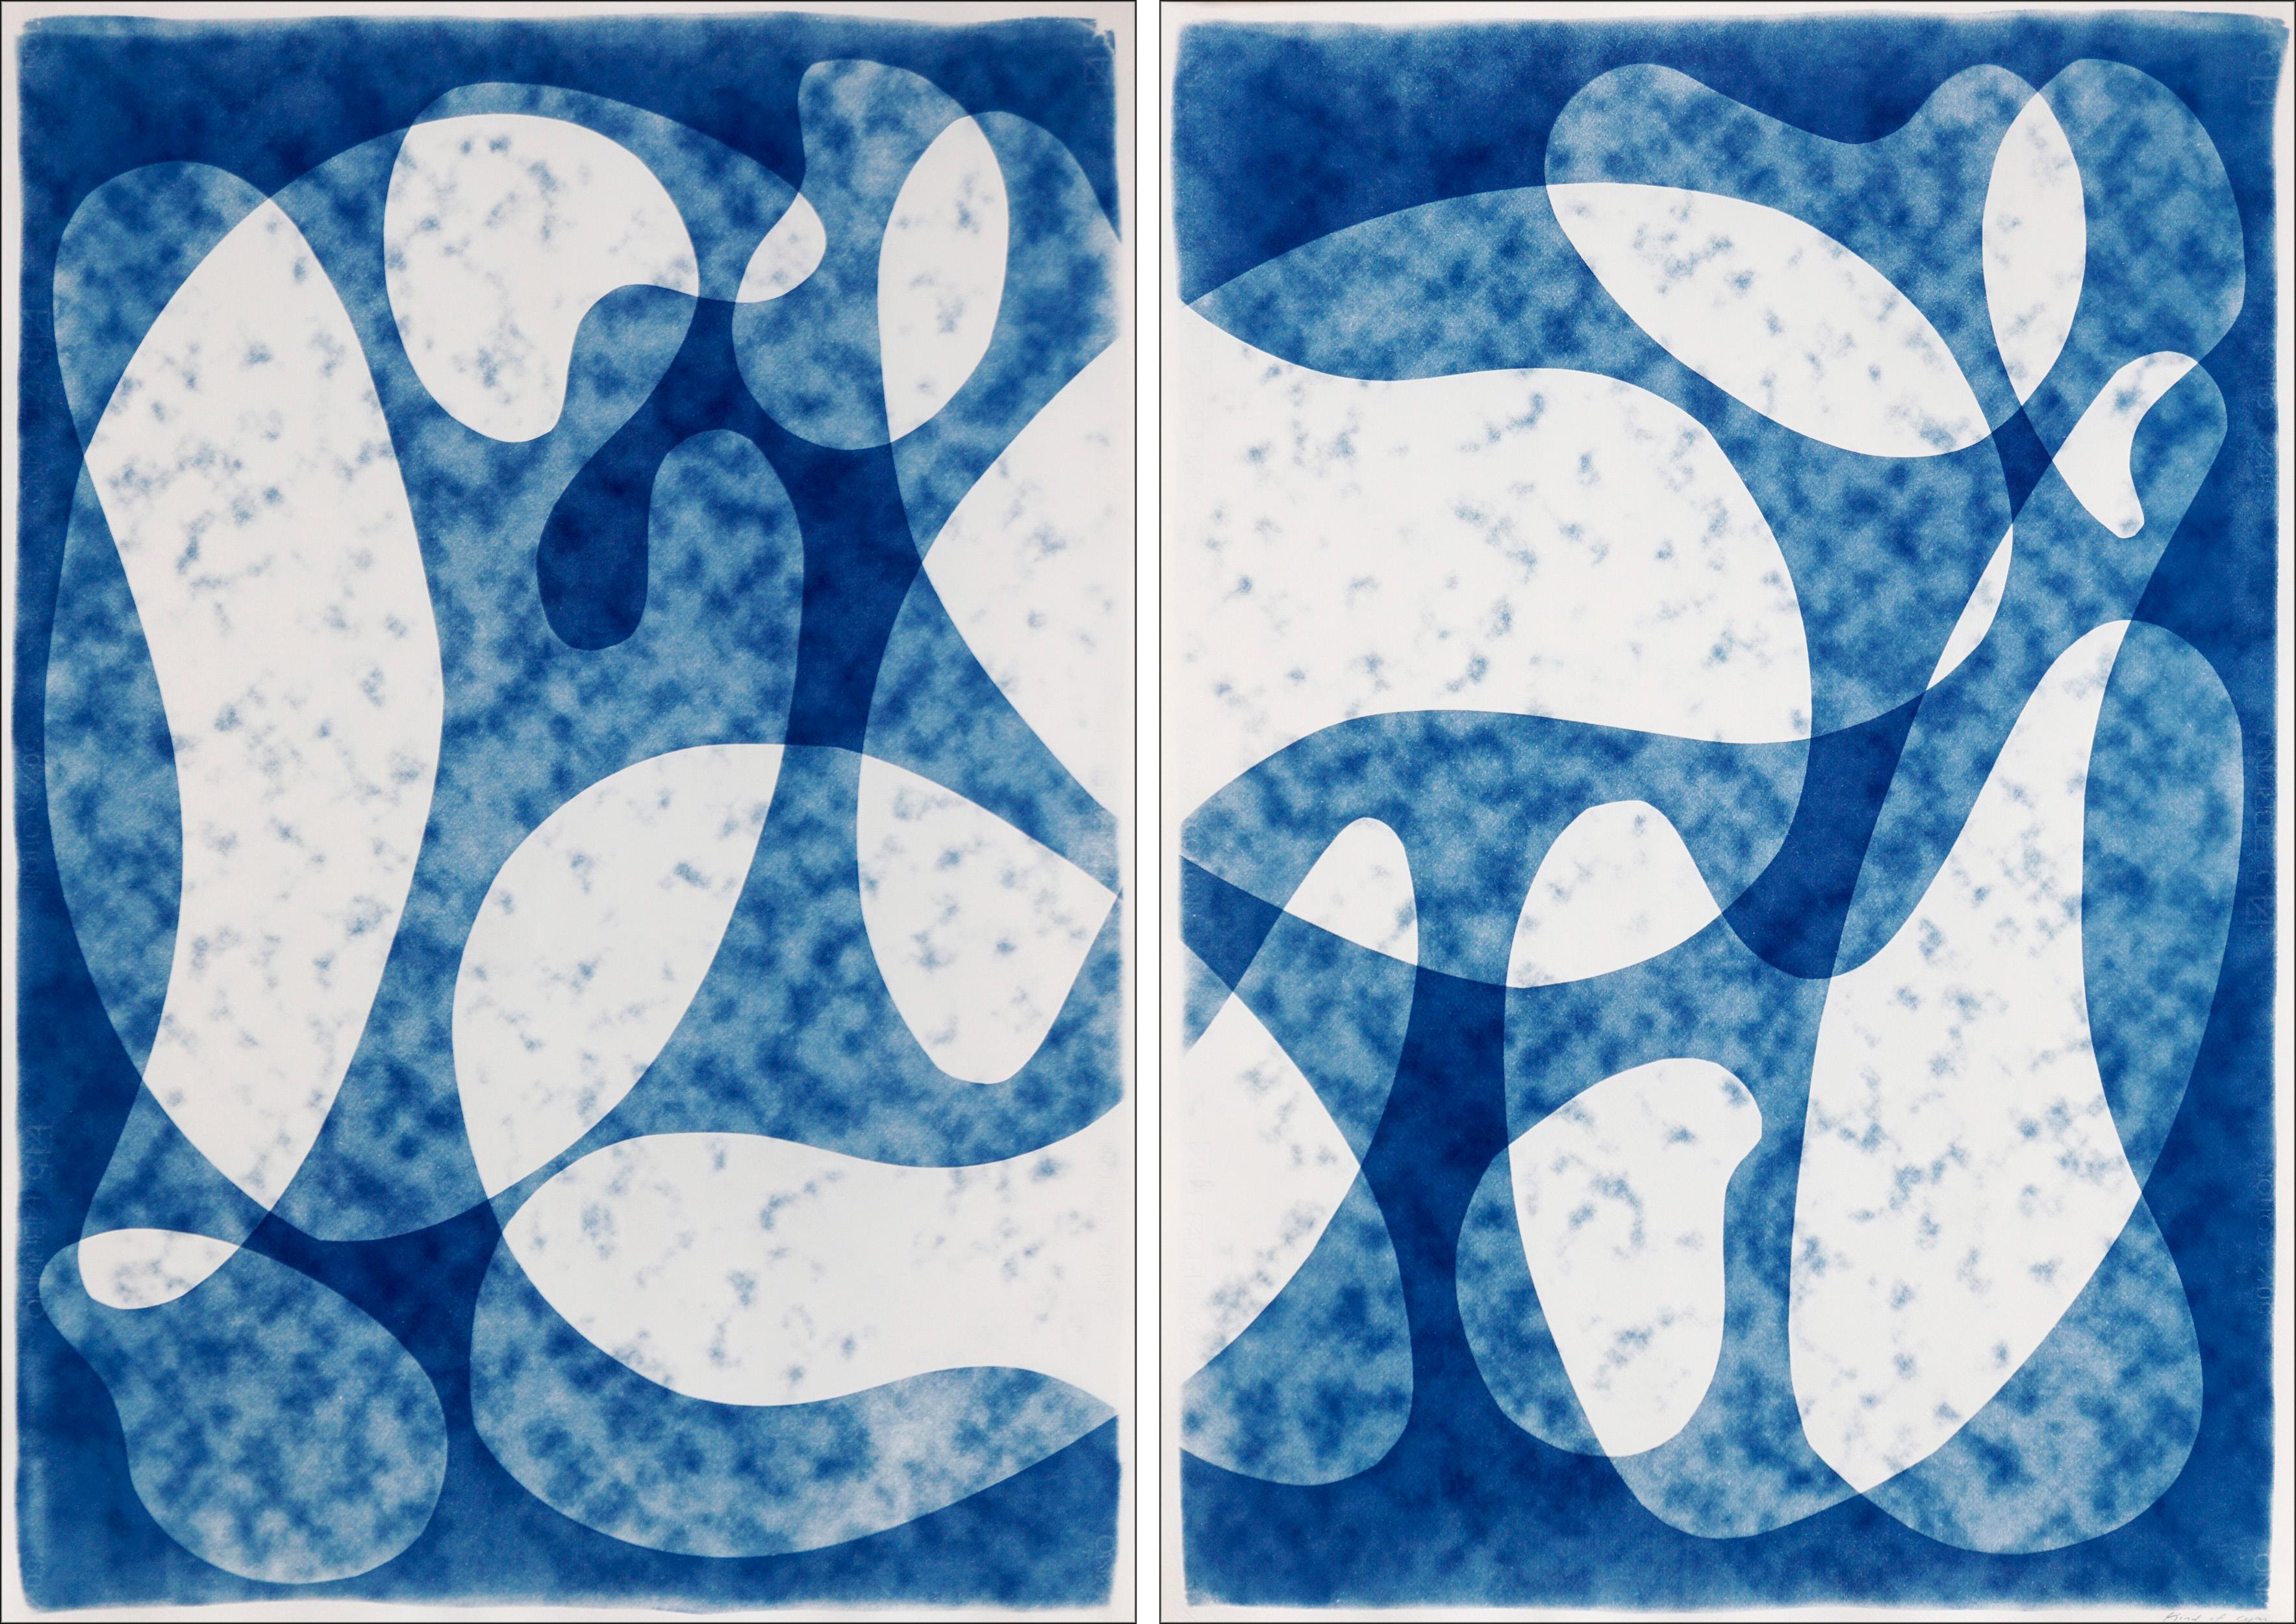 Kind of Cyan Abstract Print - Modernism in The Clouds, Abstract Mid-Century Shapes, Blue & White Large Diptych